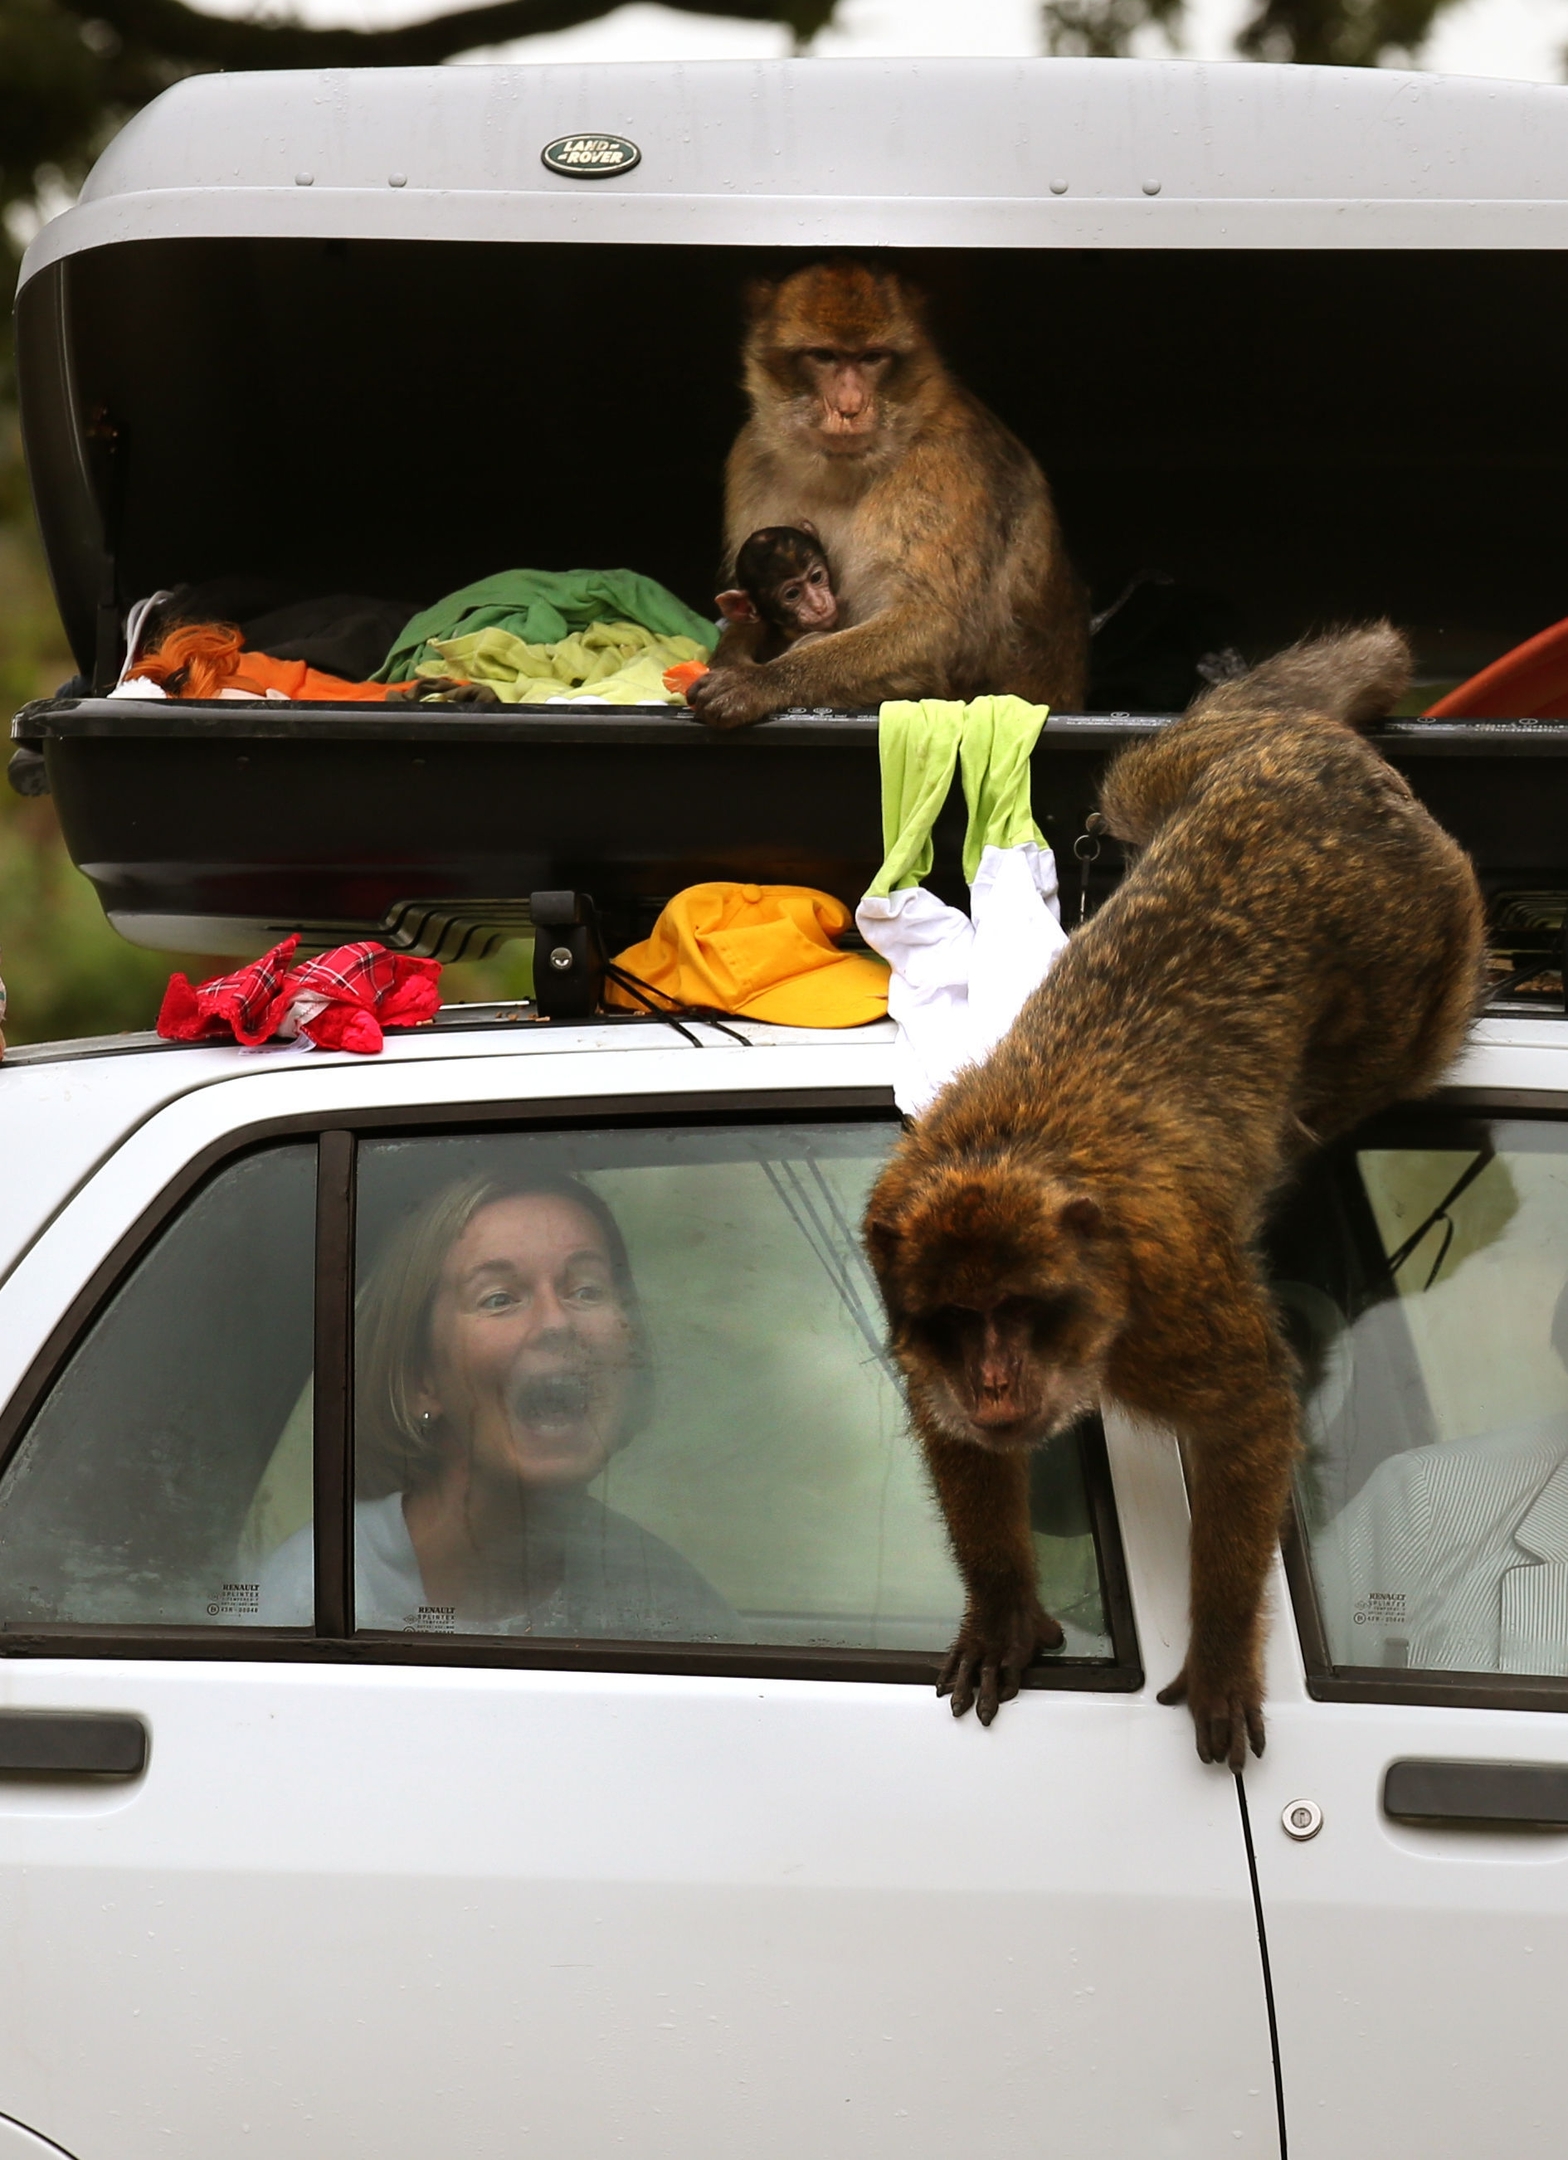 Shouting at monkeys is unlikely to deter them 